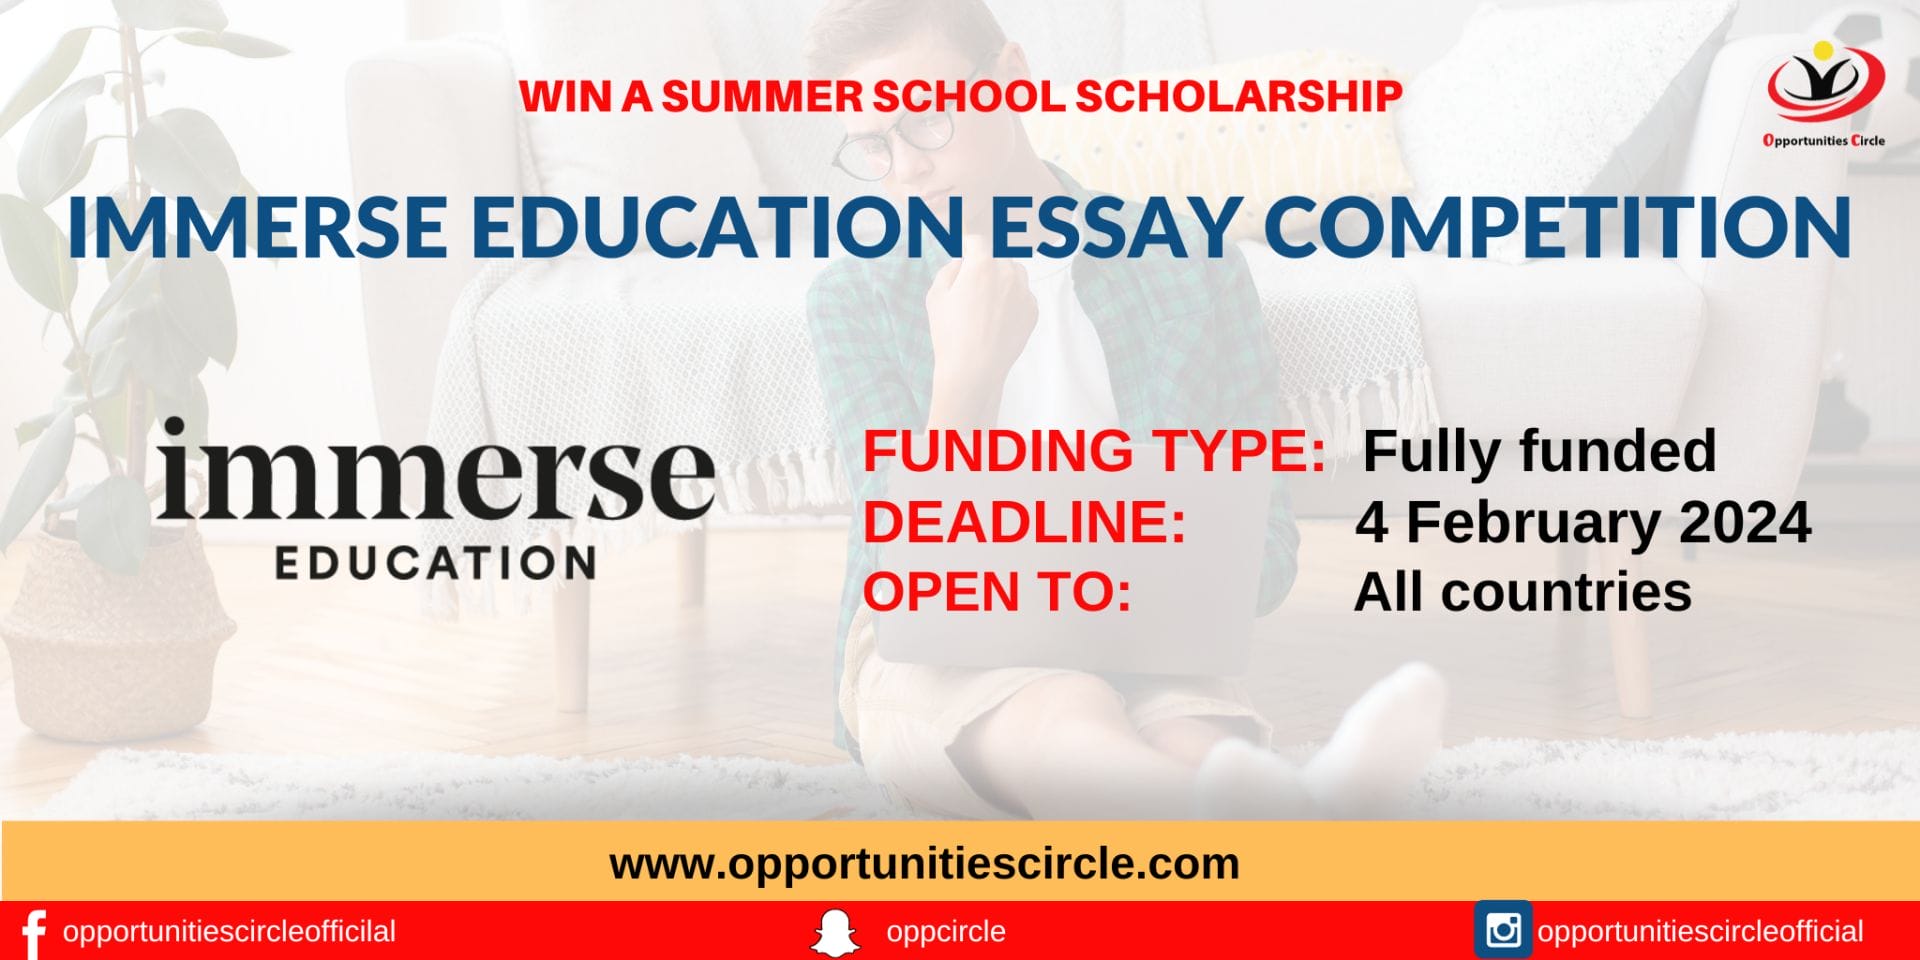 Immerse Education Essay Competition 2024 Opportunities Circle